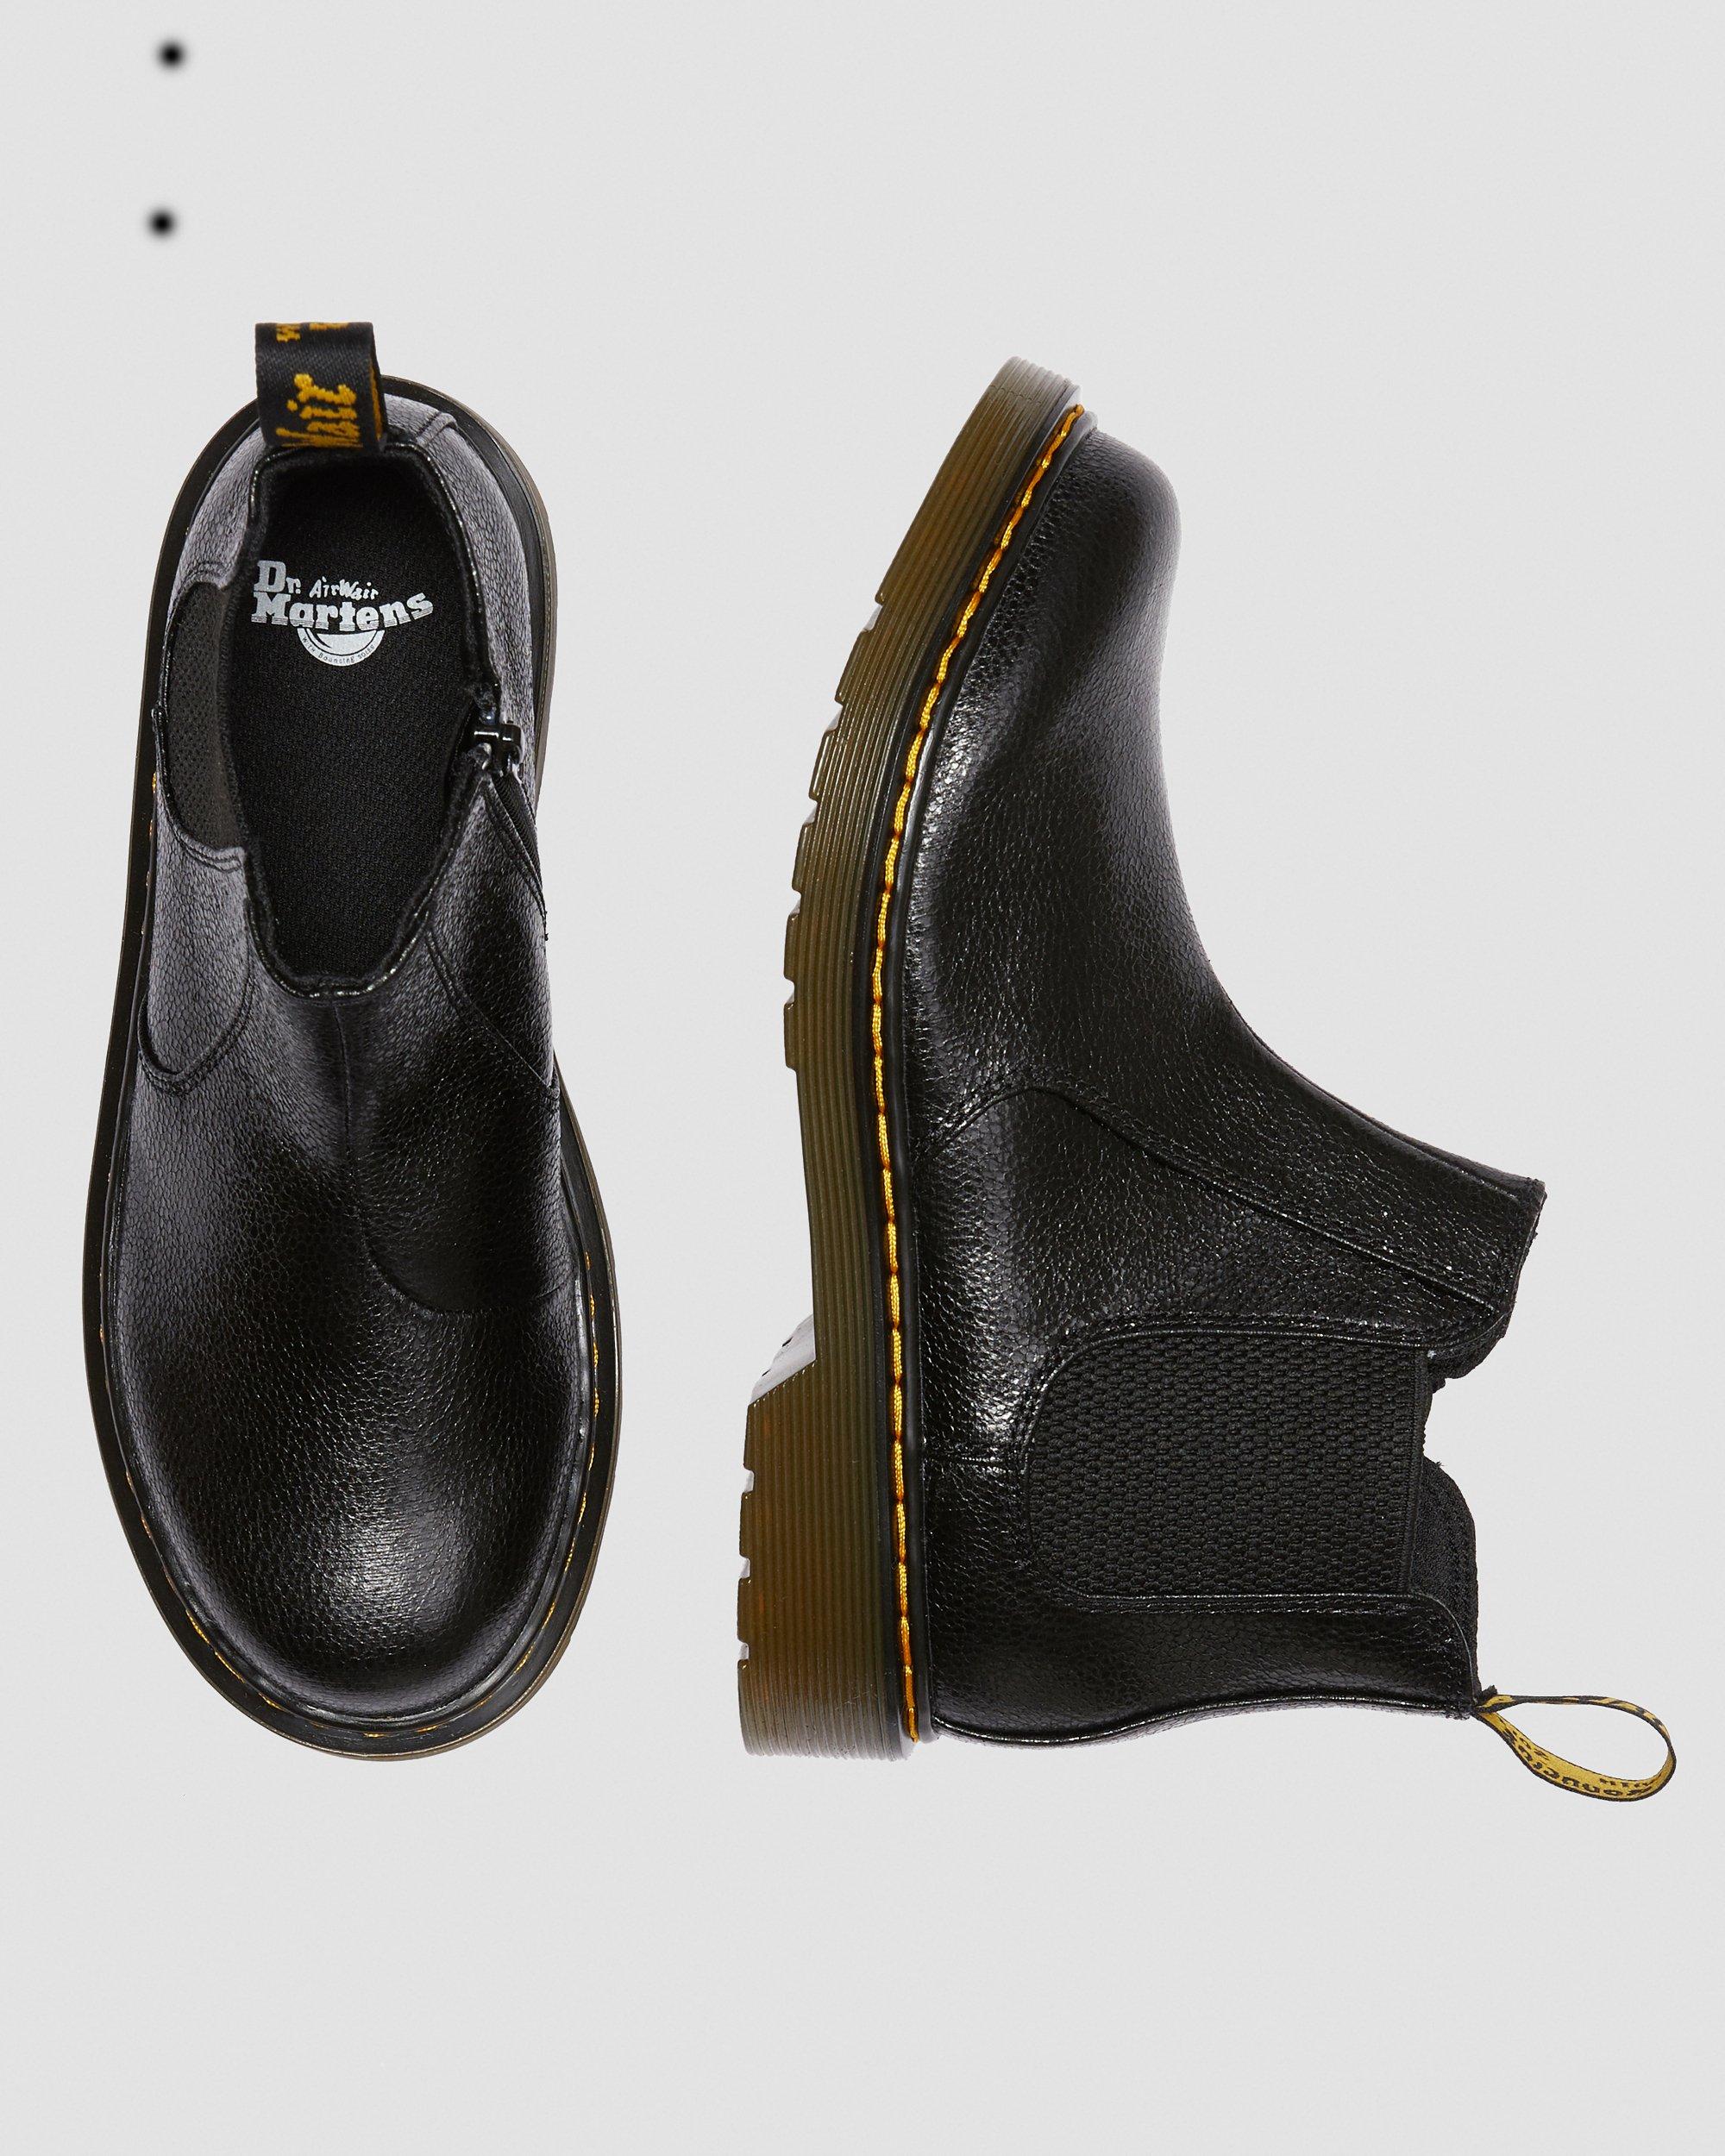 Youth 2976 Crinkle Metallic Chelsea Boots in Black | Dr. Martens